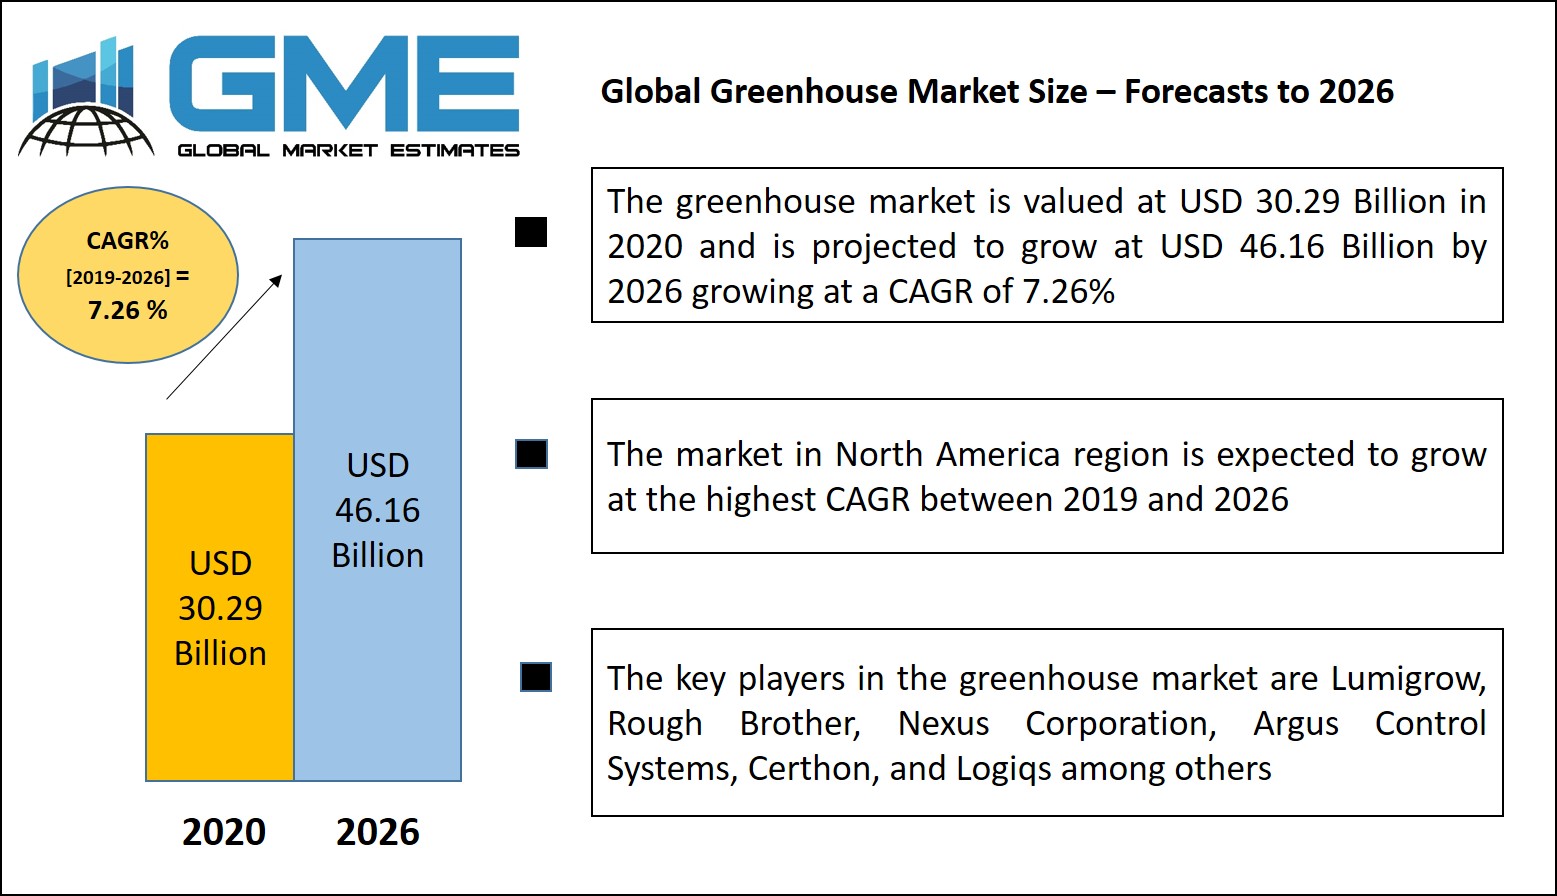 Global Greenhouse Market Size – Forecasts to 2026